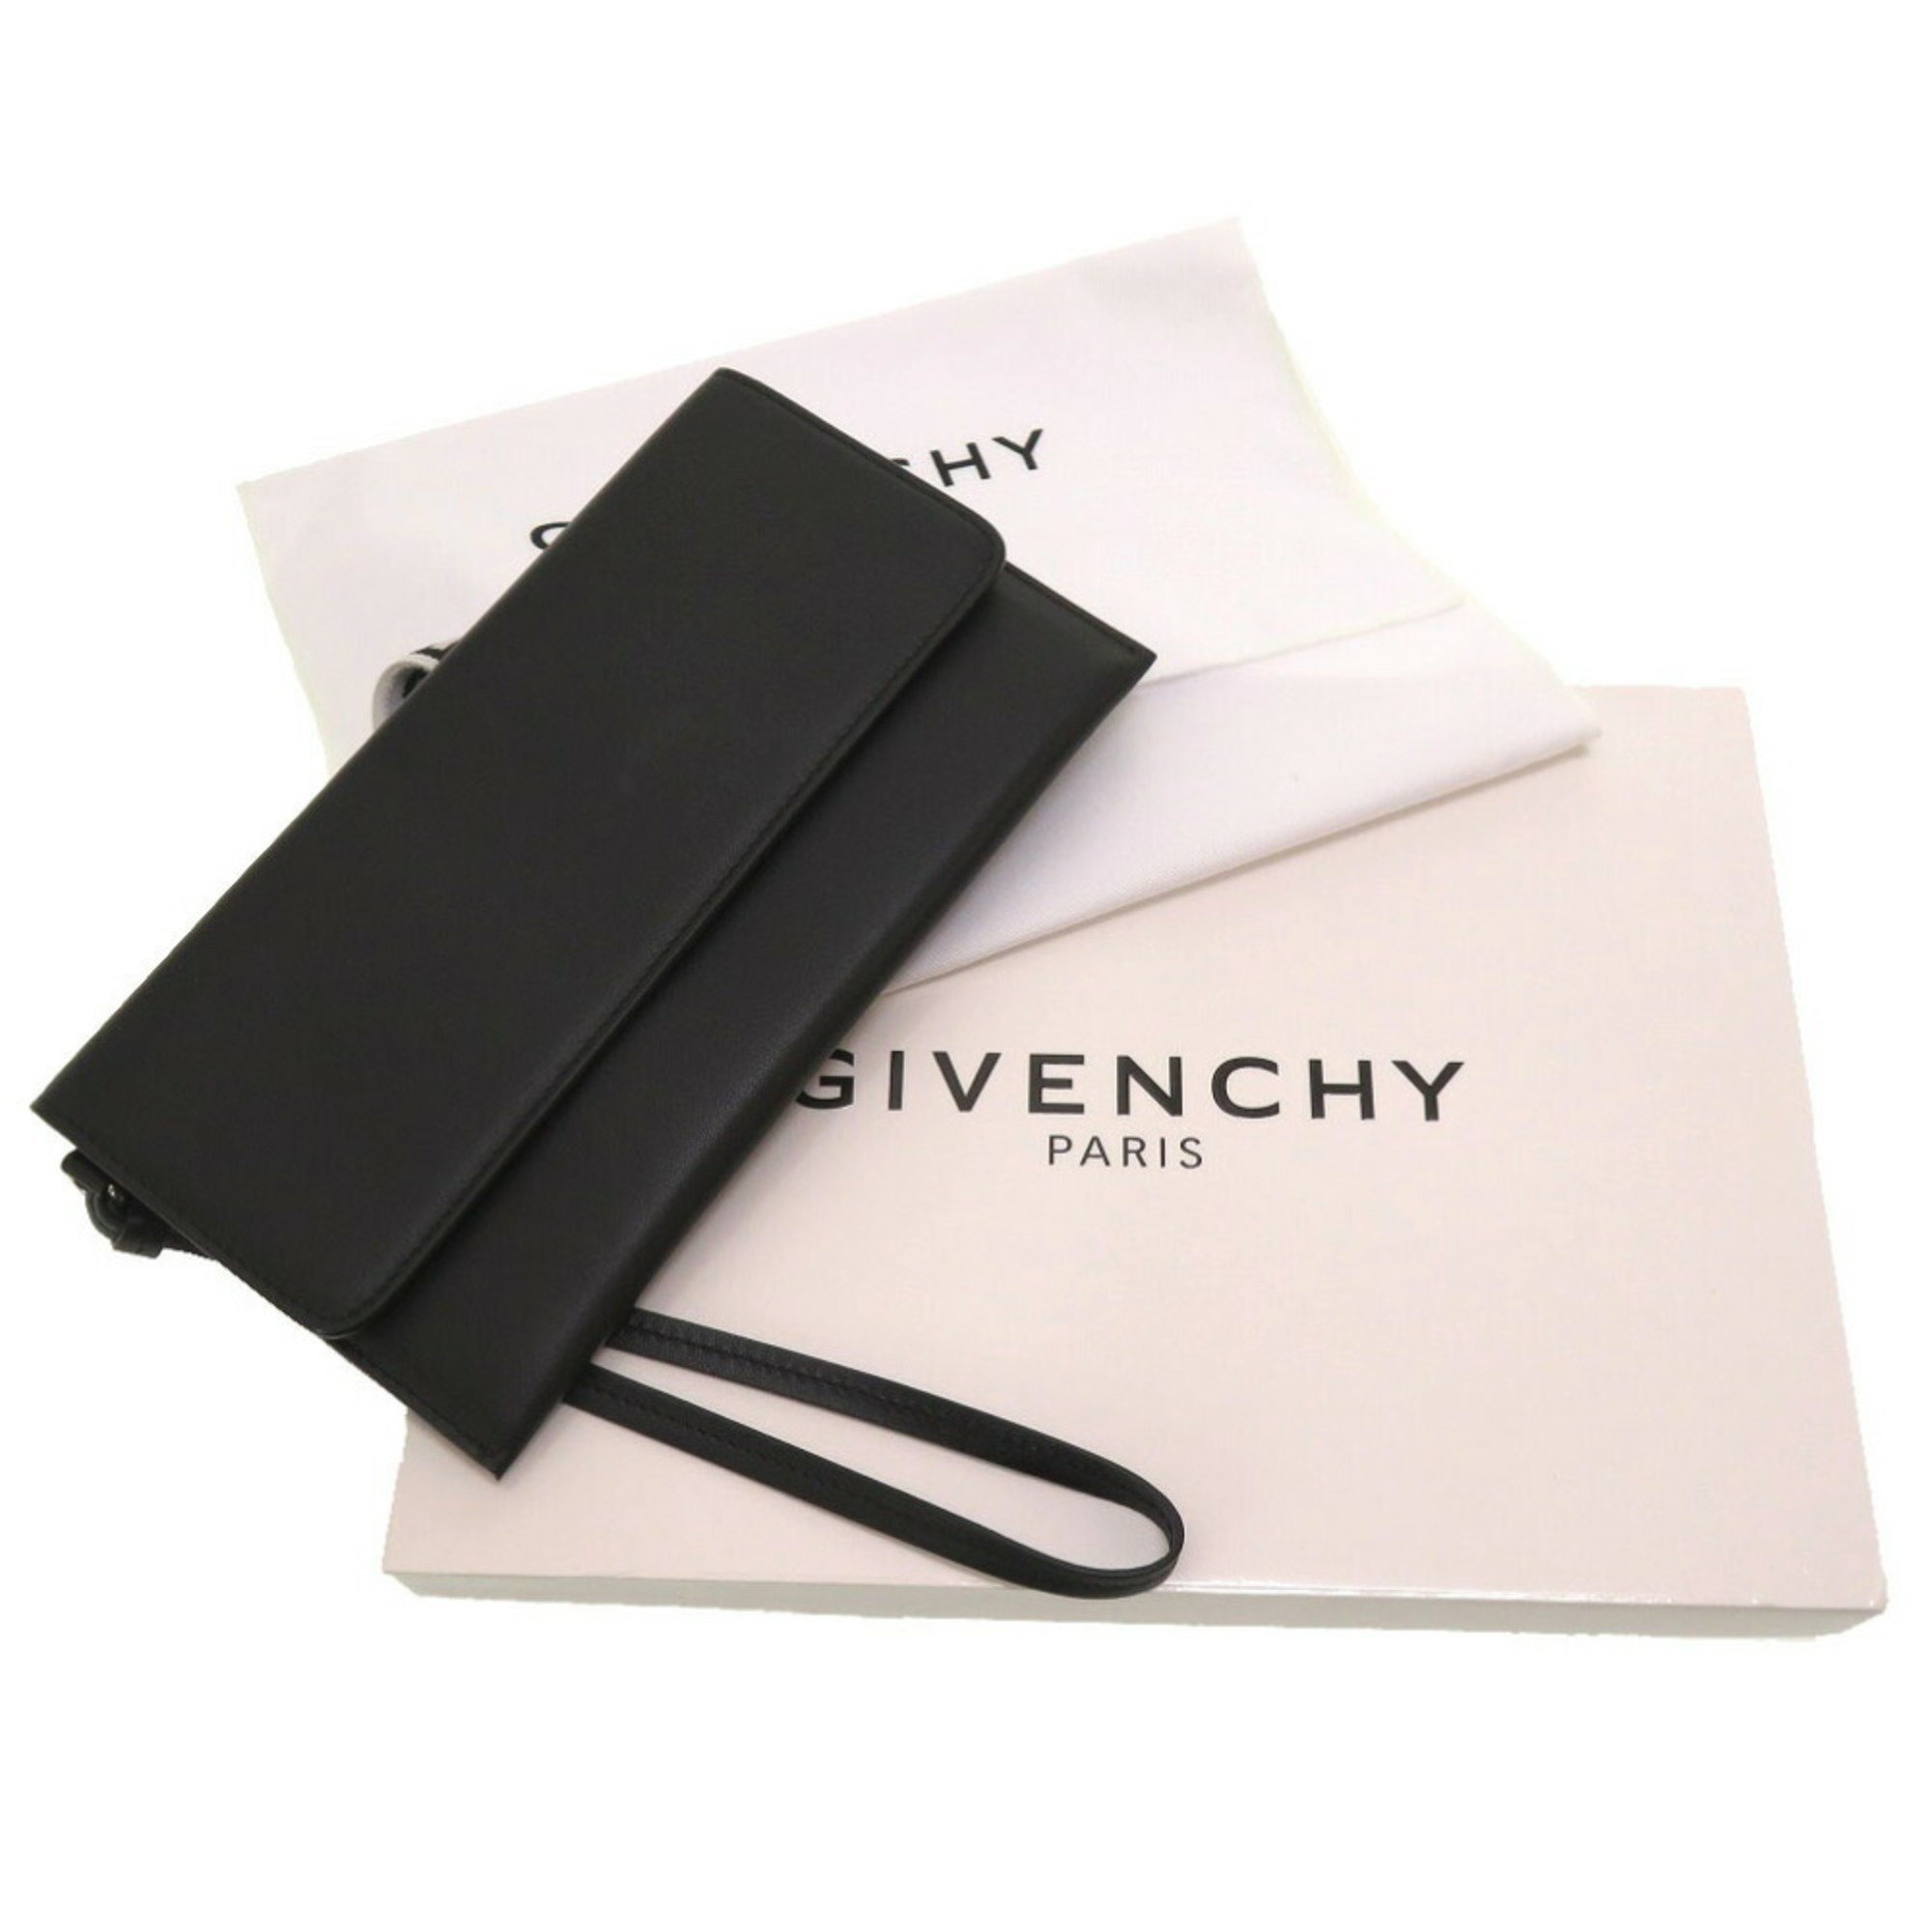 Givenchy leather black clutch bag